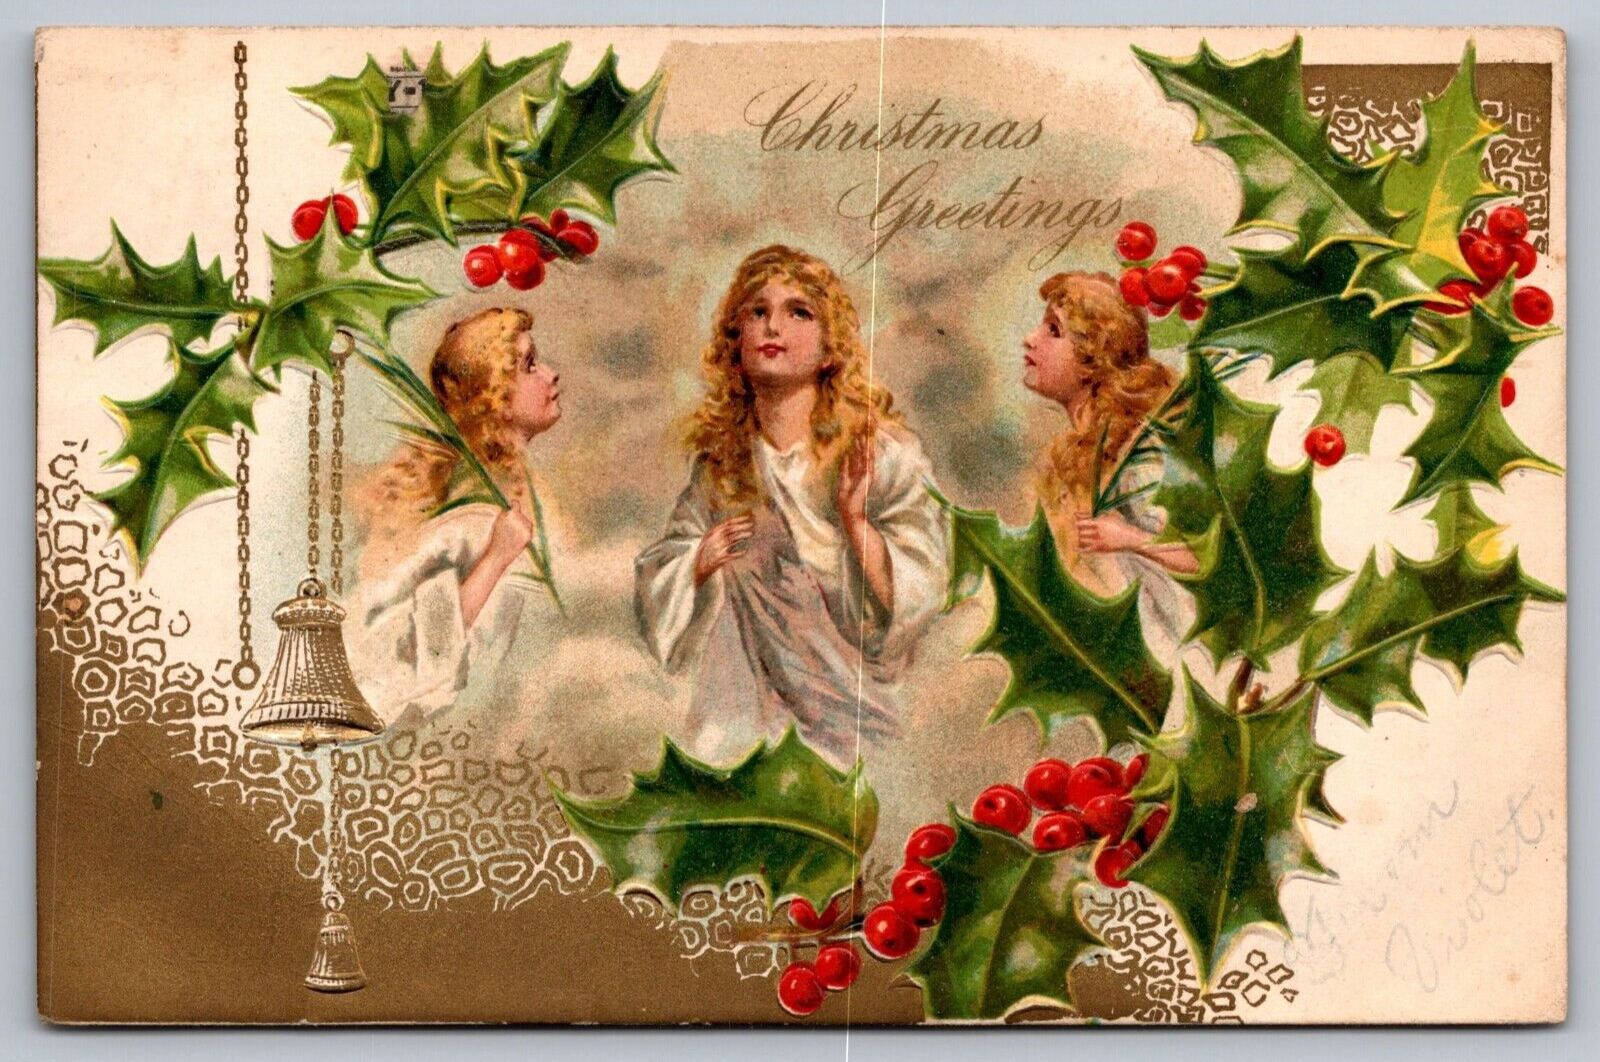 Christmas Greetings Antique Embossed Postcard c1906 w/ Depiction of Angels